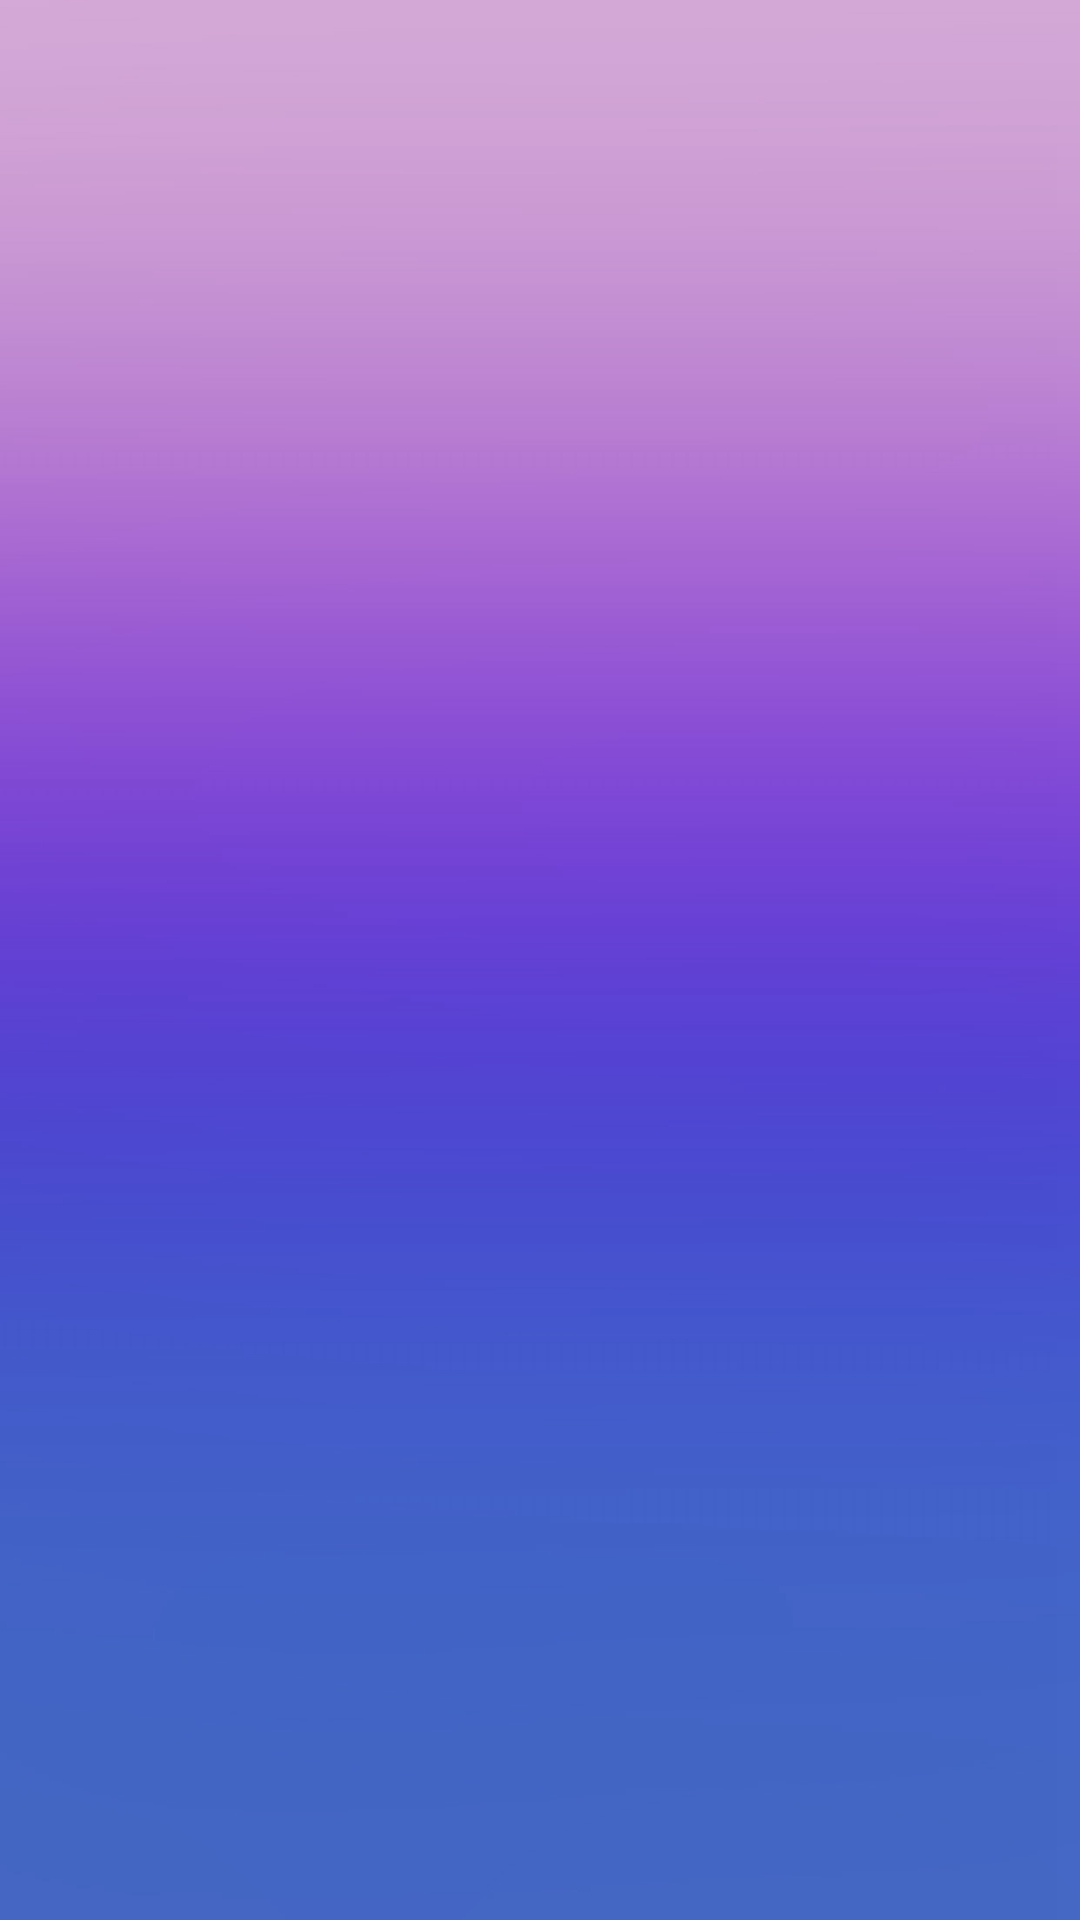 Blue And Purple Wallpaper - Blue And Purple Wallpaper Iphone , HD Wallpaper & Backgrounds